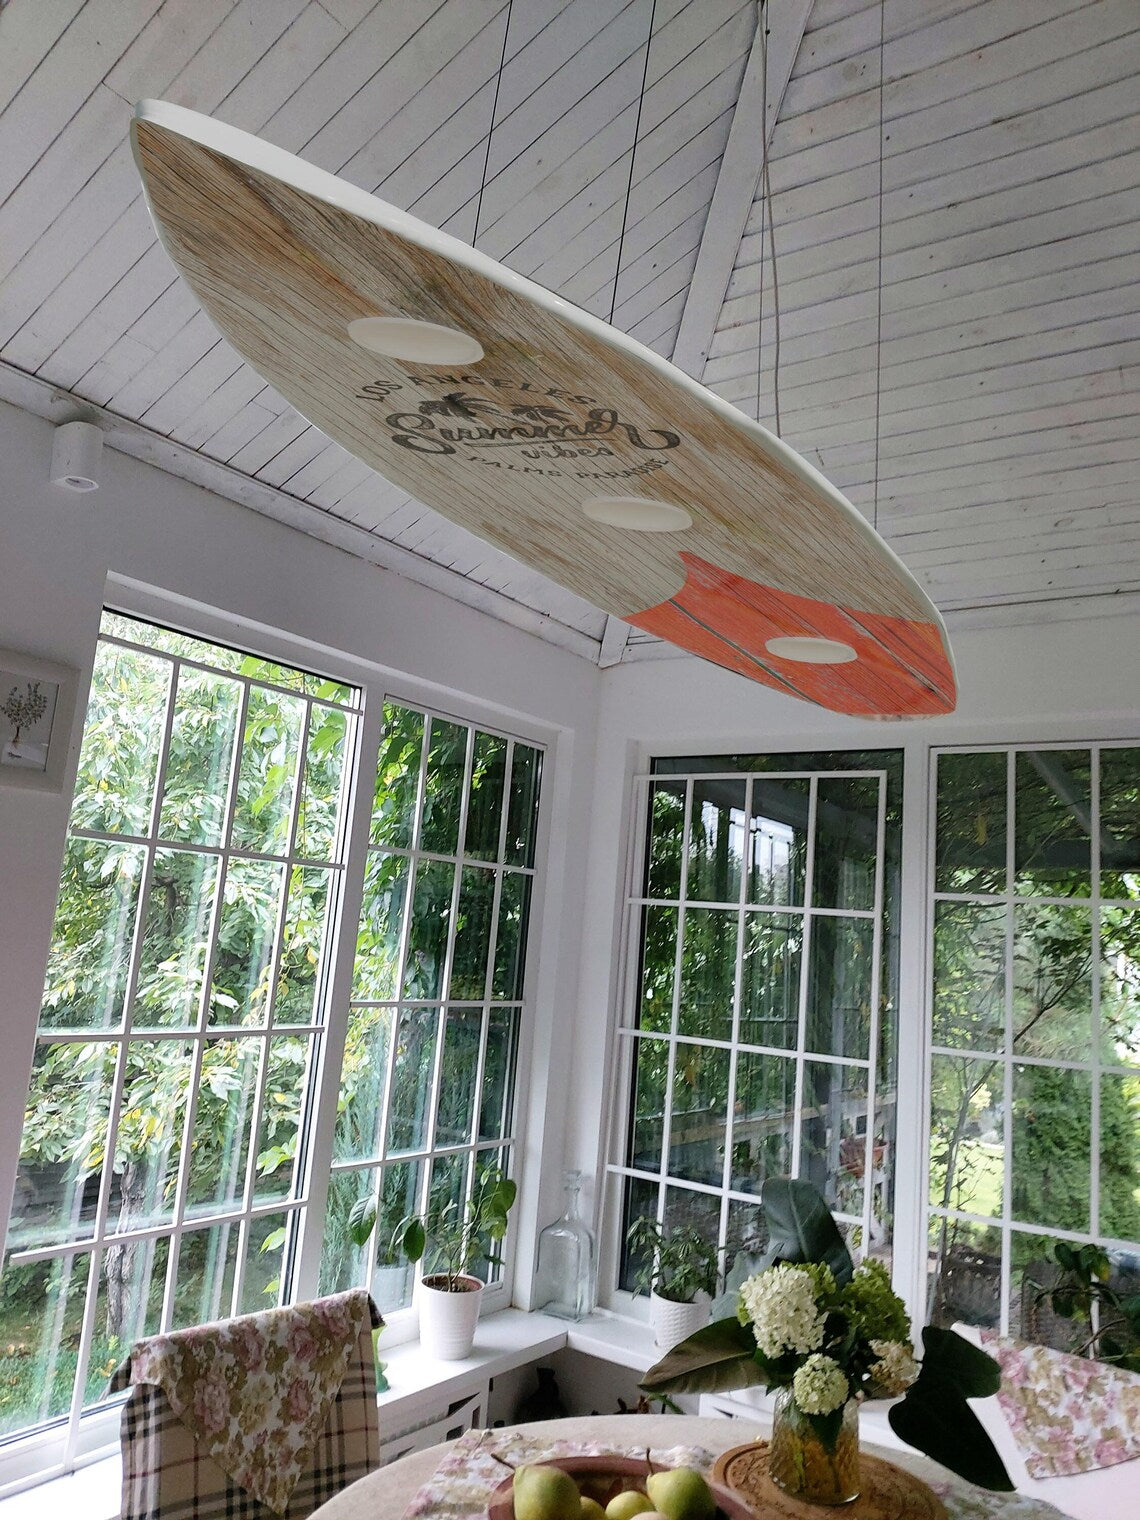 Surfboard Shaped Ceiling Chandelier - Pool Table Lights